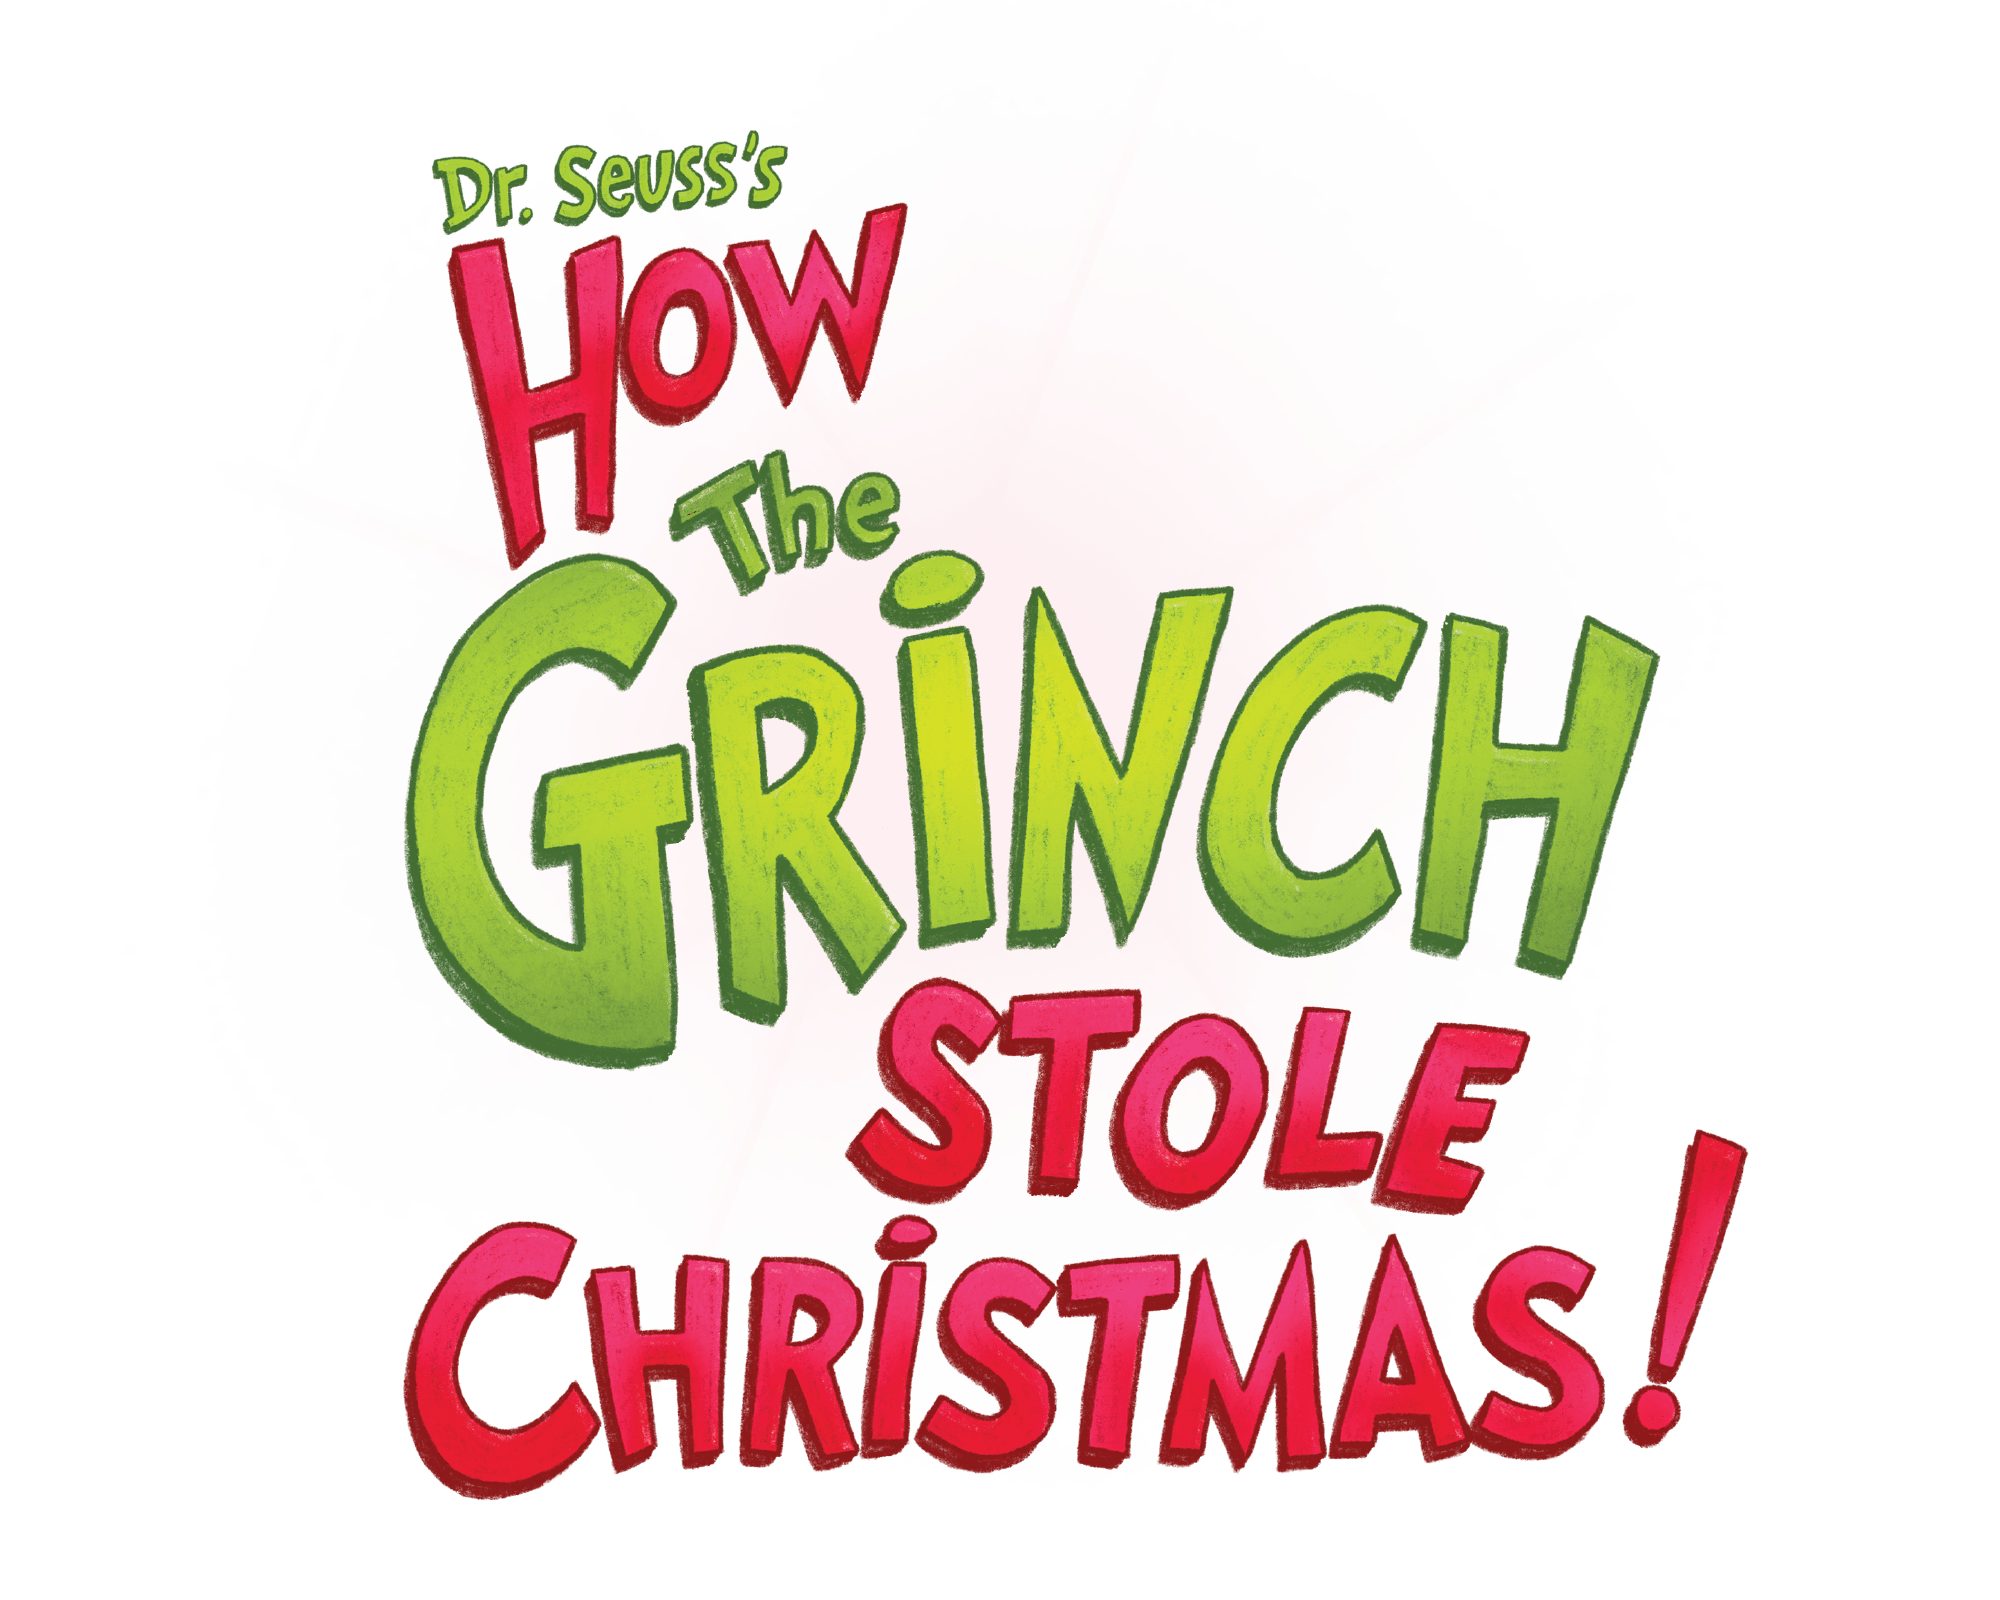 New Justice x The Grinch clothing for tweens available only at